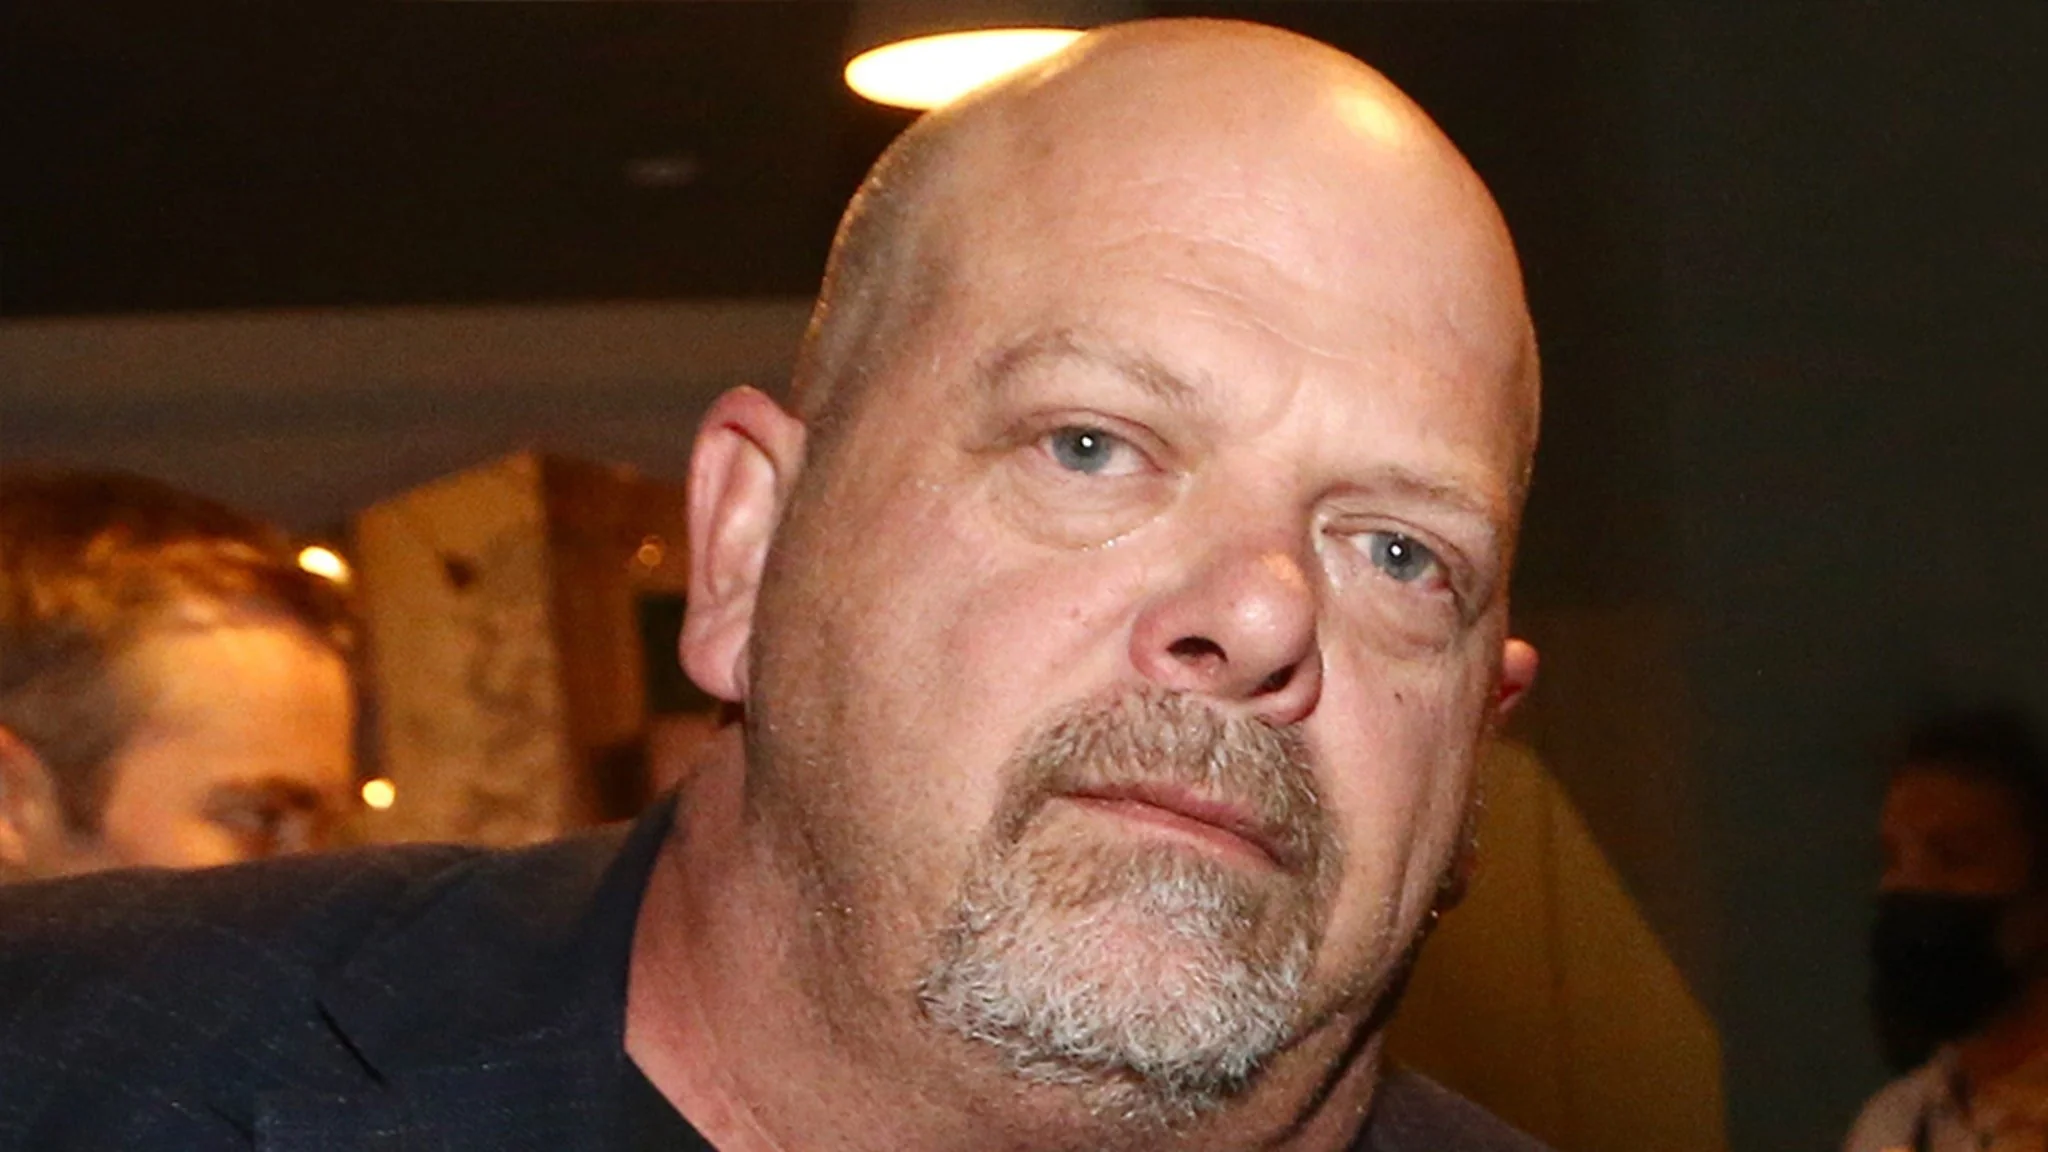 Rick Harrison Receives Condolences Call From Trump Family After Son’s Tragic Death